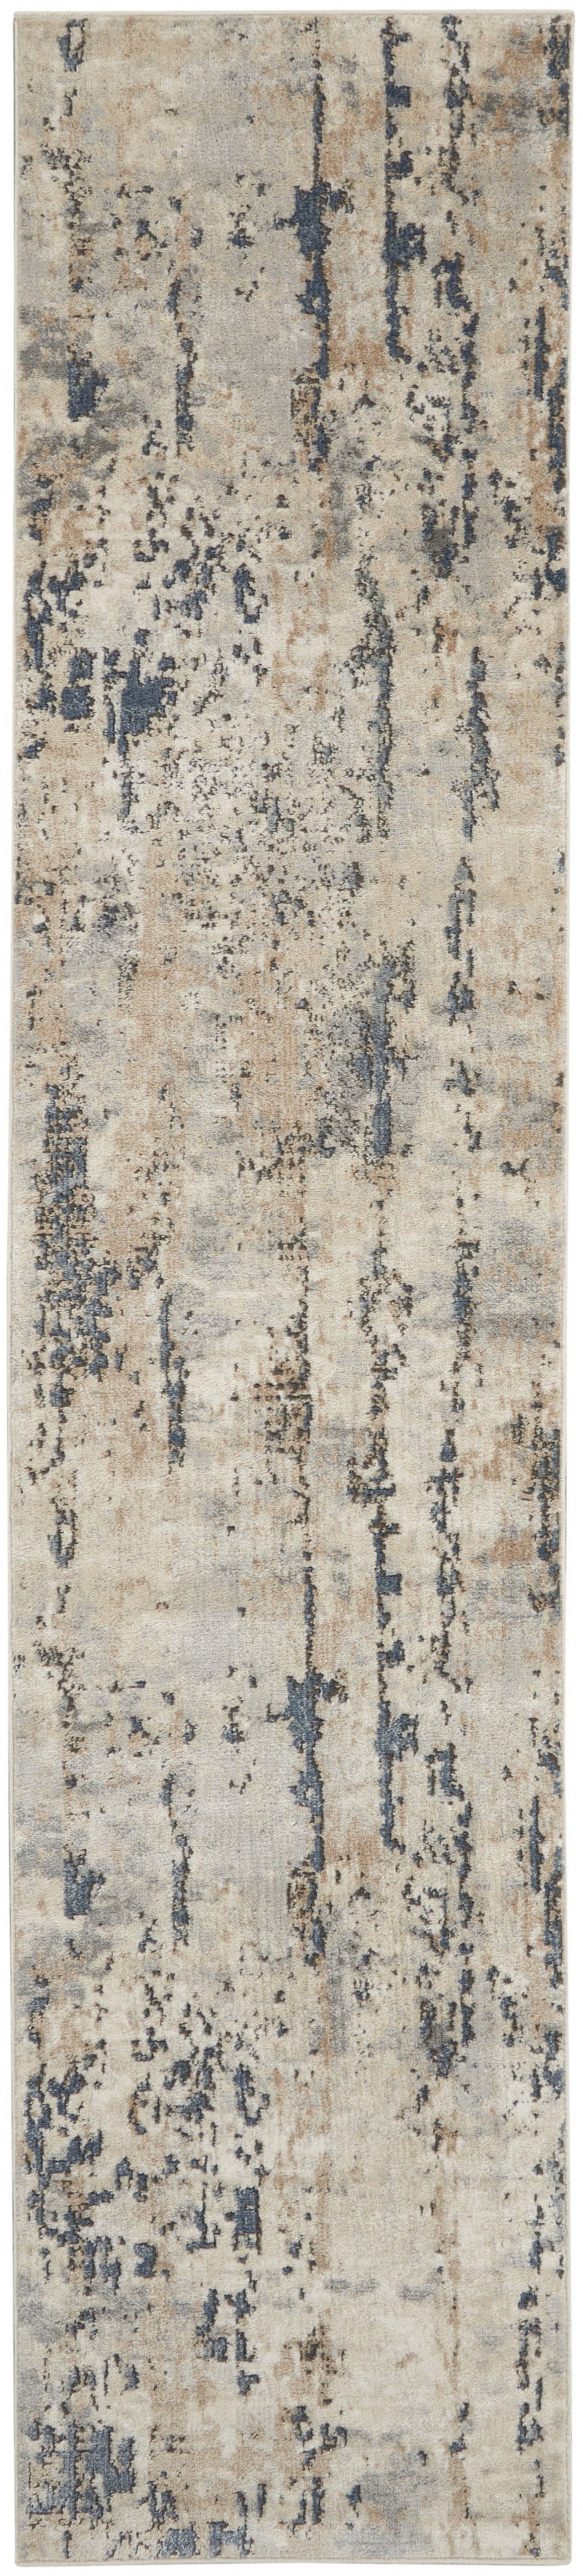 Nourison Concerto Abstract Beige Grey 2'2" x 20' Area Rug (2x20) - image 2 of 7